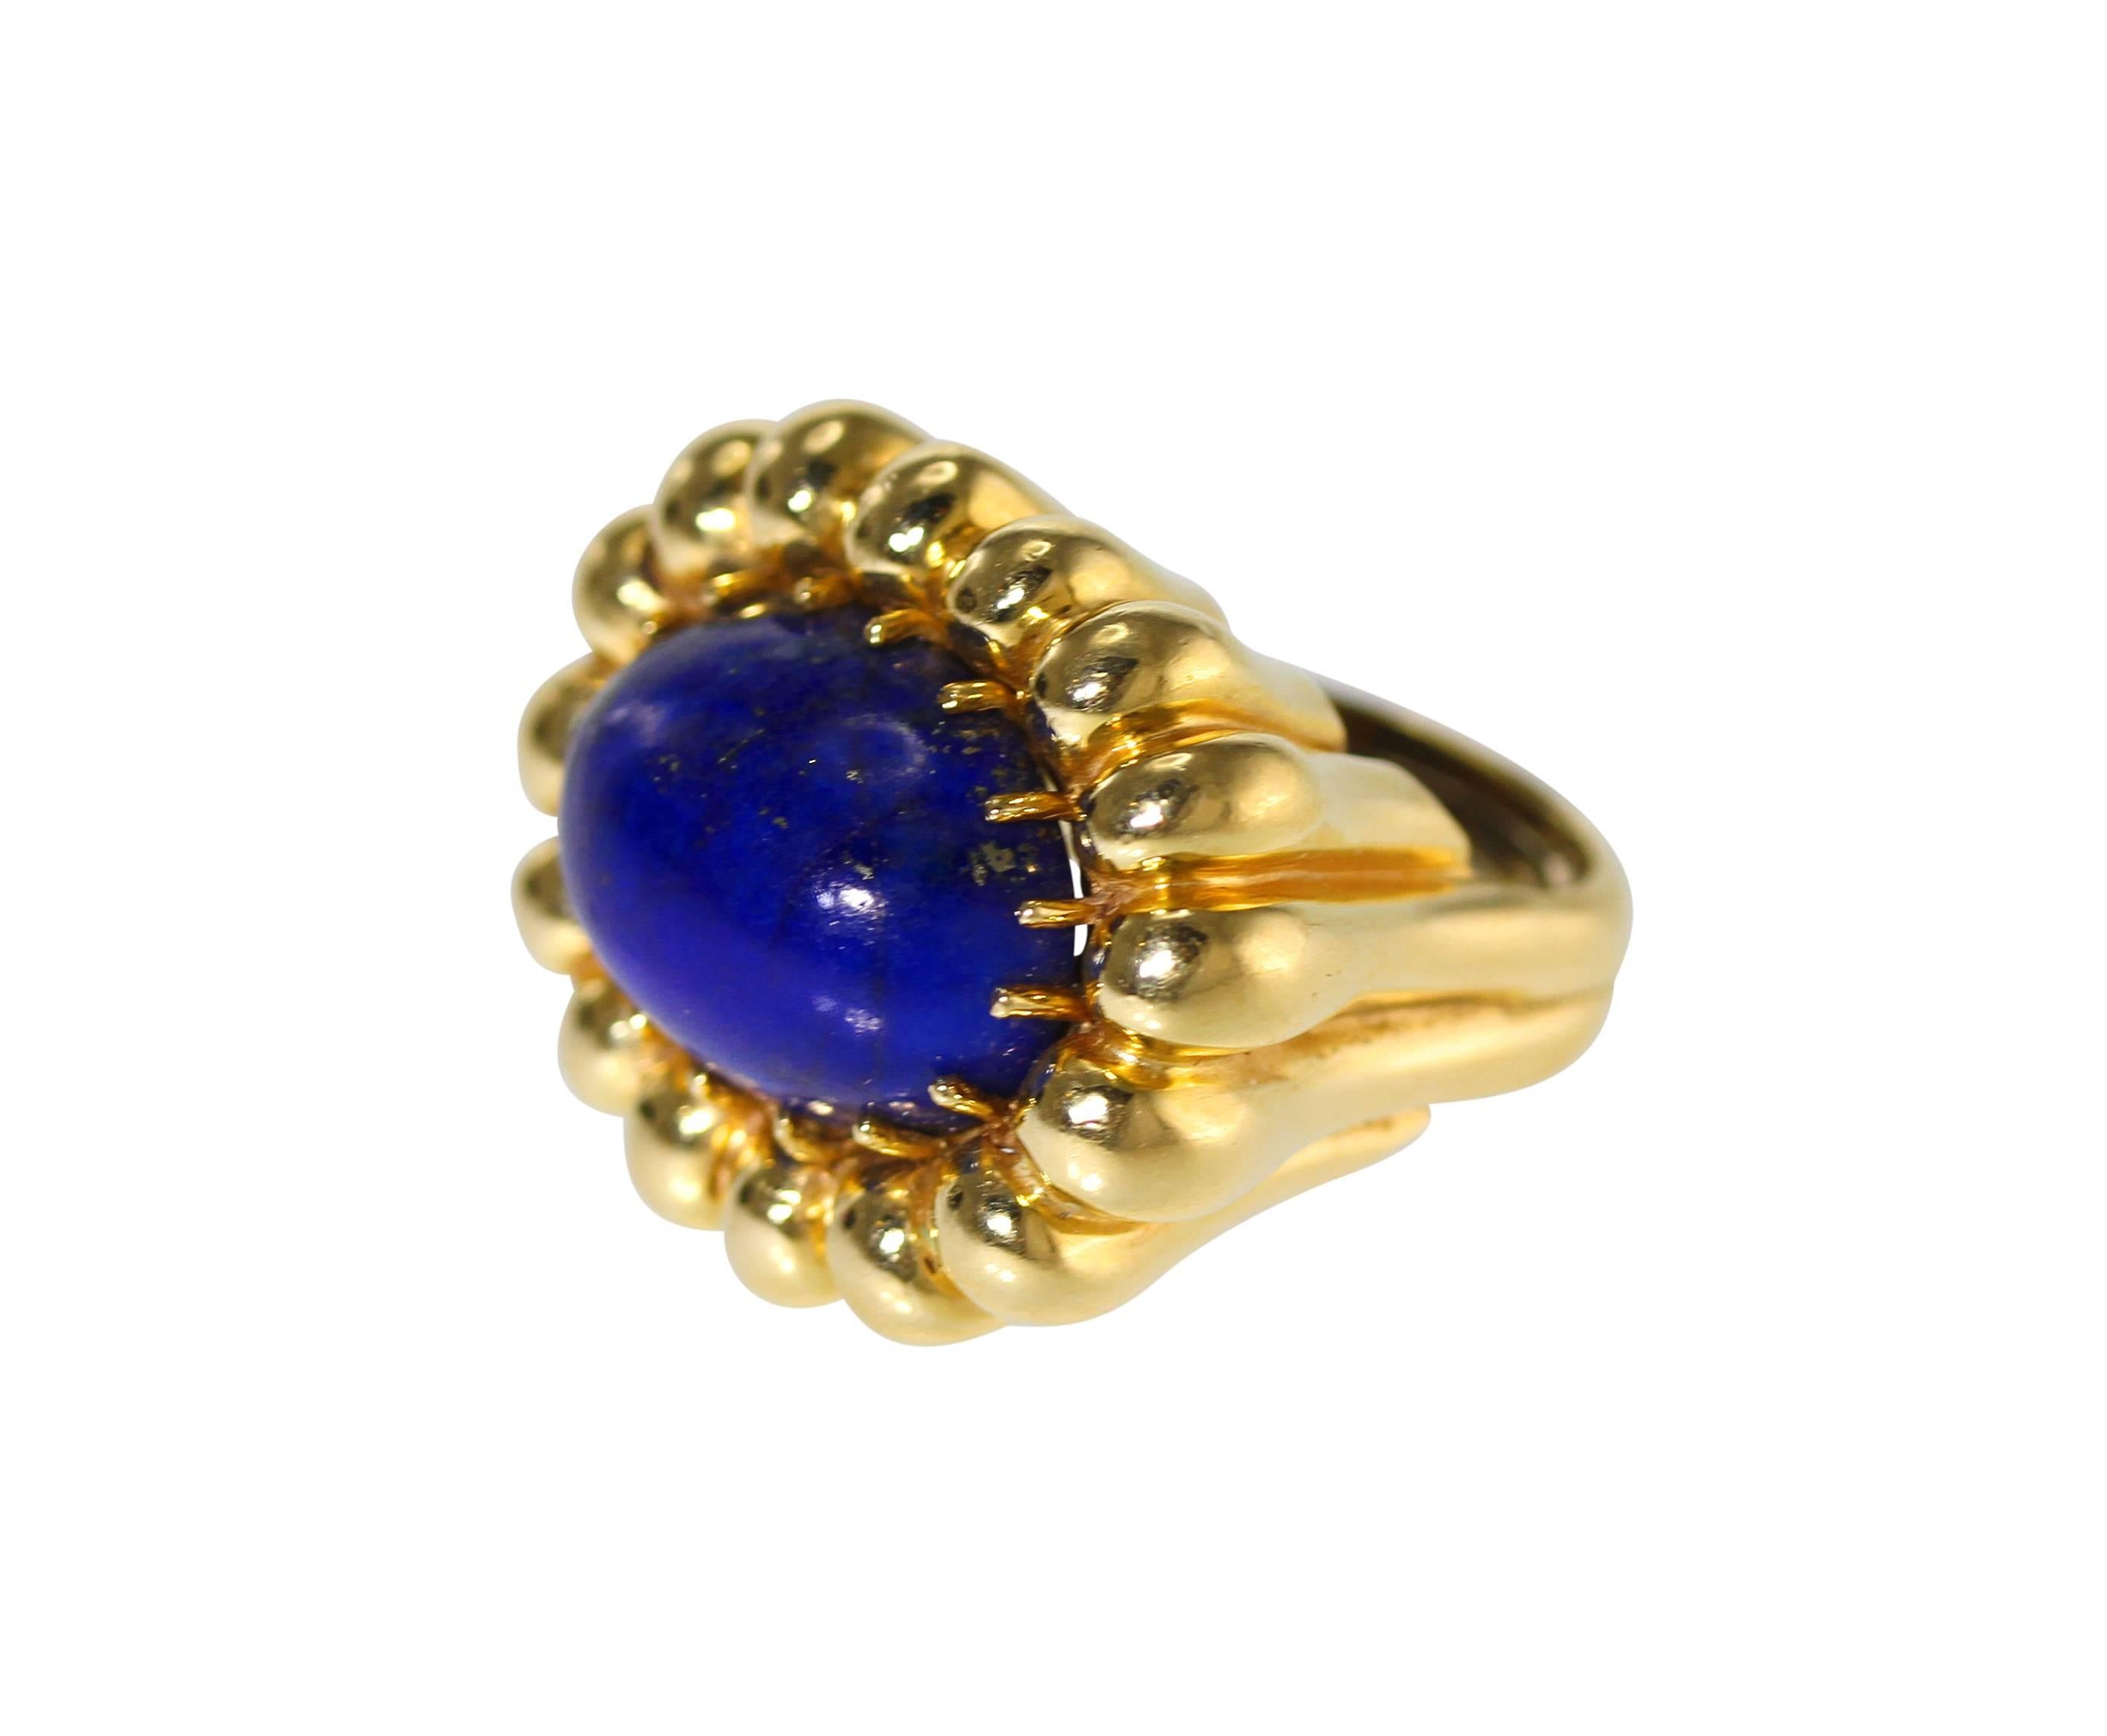 An 18 karat yellow gold and lapis lazuli ring, circa 1970, of fluted design set sideways in the center with a cabochon oval lapis lazuli measuring approximately 20.0 x 15.0 mm, size approximately 6 1/2, gross weight 26.2 grams. 